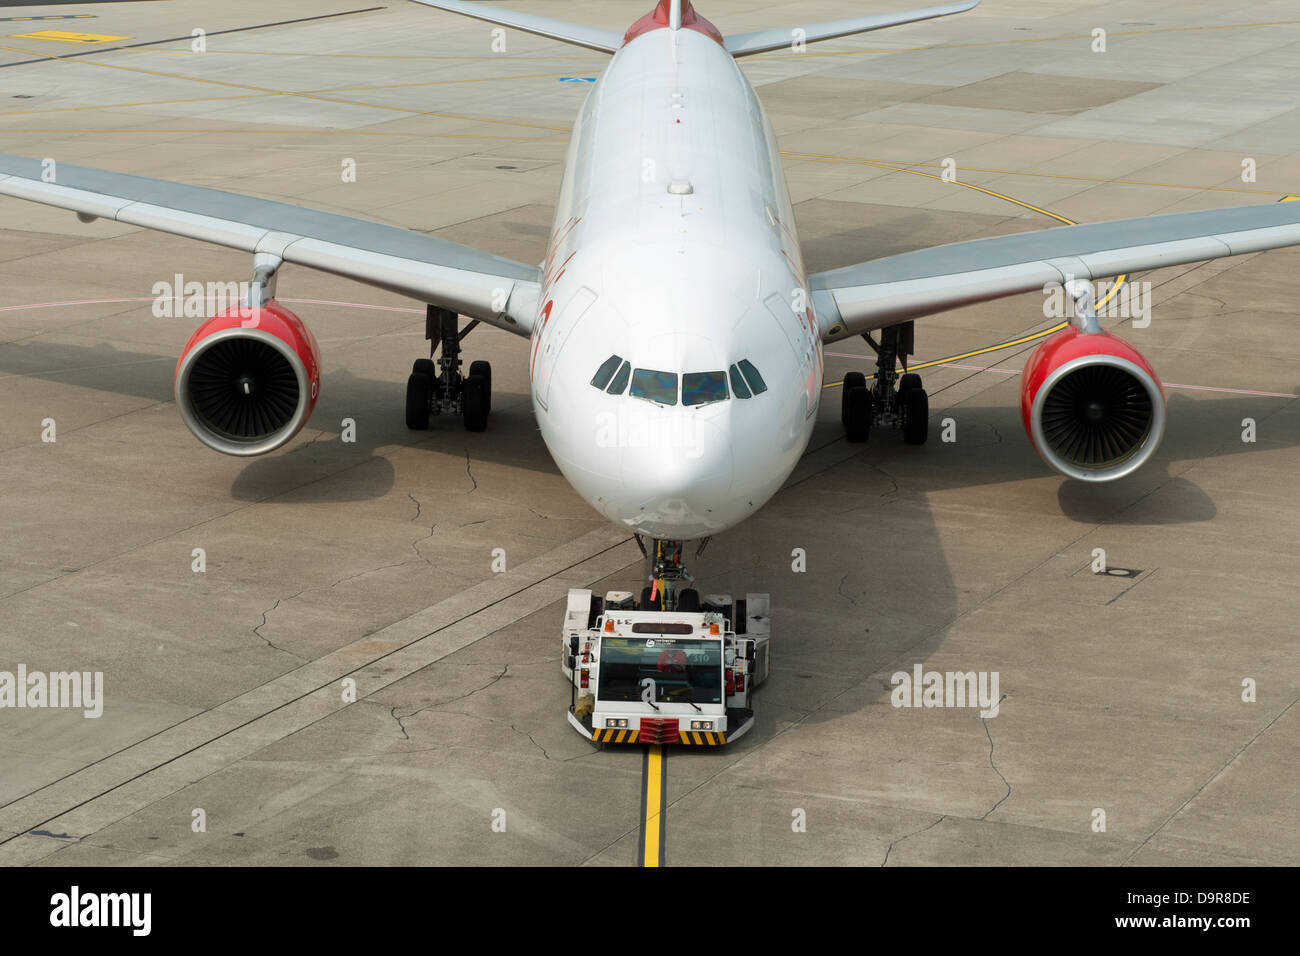 Airbus A330 commercial jet airliner Stock Photo